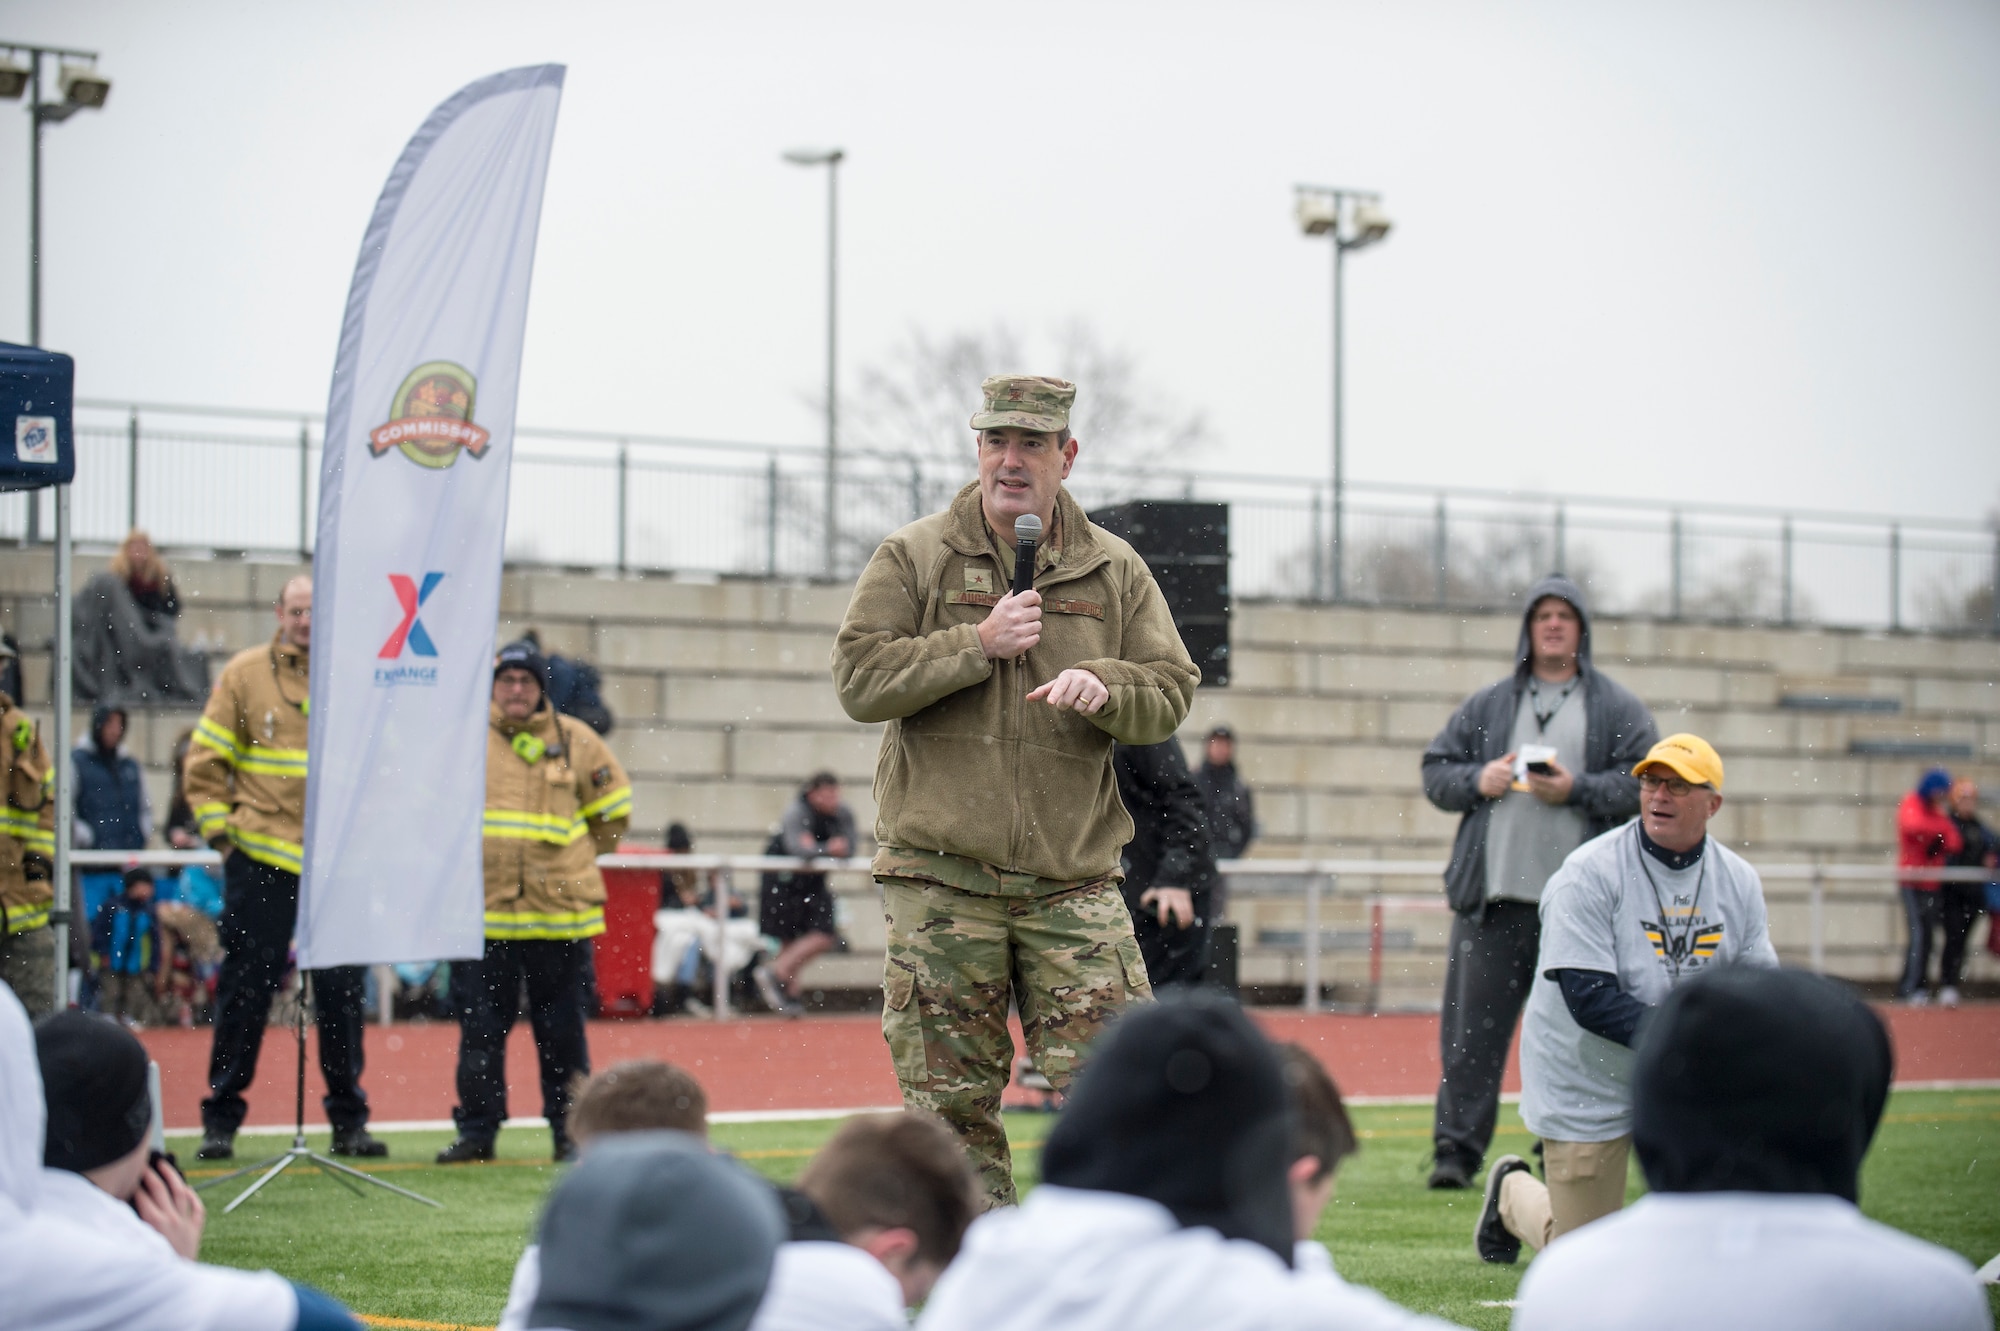 U.S. Air Force Brig. Gen. Mark R. August, 86th Airlift Wing commander, speaks to the Alejandro Villanueva football camp attendees before the camp begins at Kaiserslautern High School on Vogelweh Military Complex, April 13, 2019. August thanked Villanueva, Pittsburgh Steelers offensive lineman, and former U.S. Army captain and Army Ranger, for traveling to Europe to coach Kaiserslautern Military Community youth and adults. (U.S. Air Force photo by Staff Sgt. Jonathan Bass)